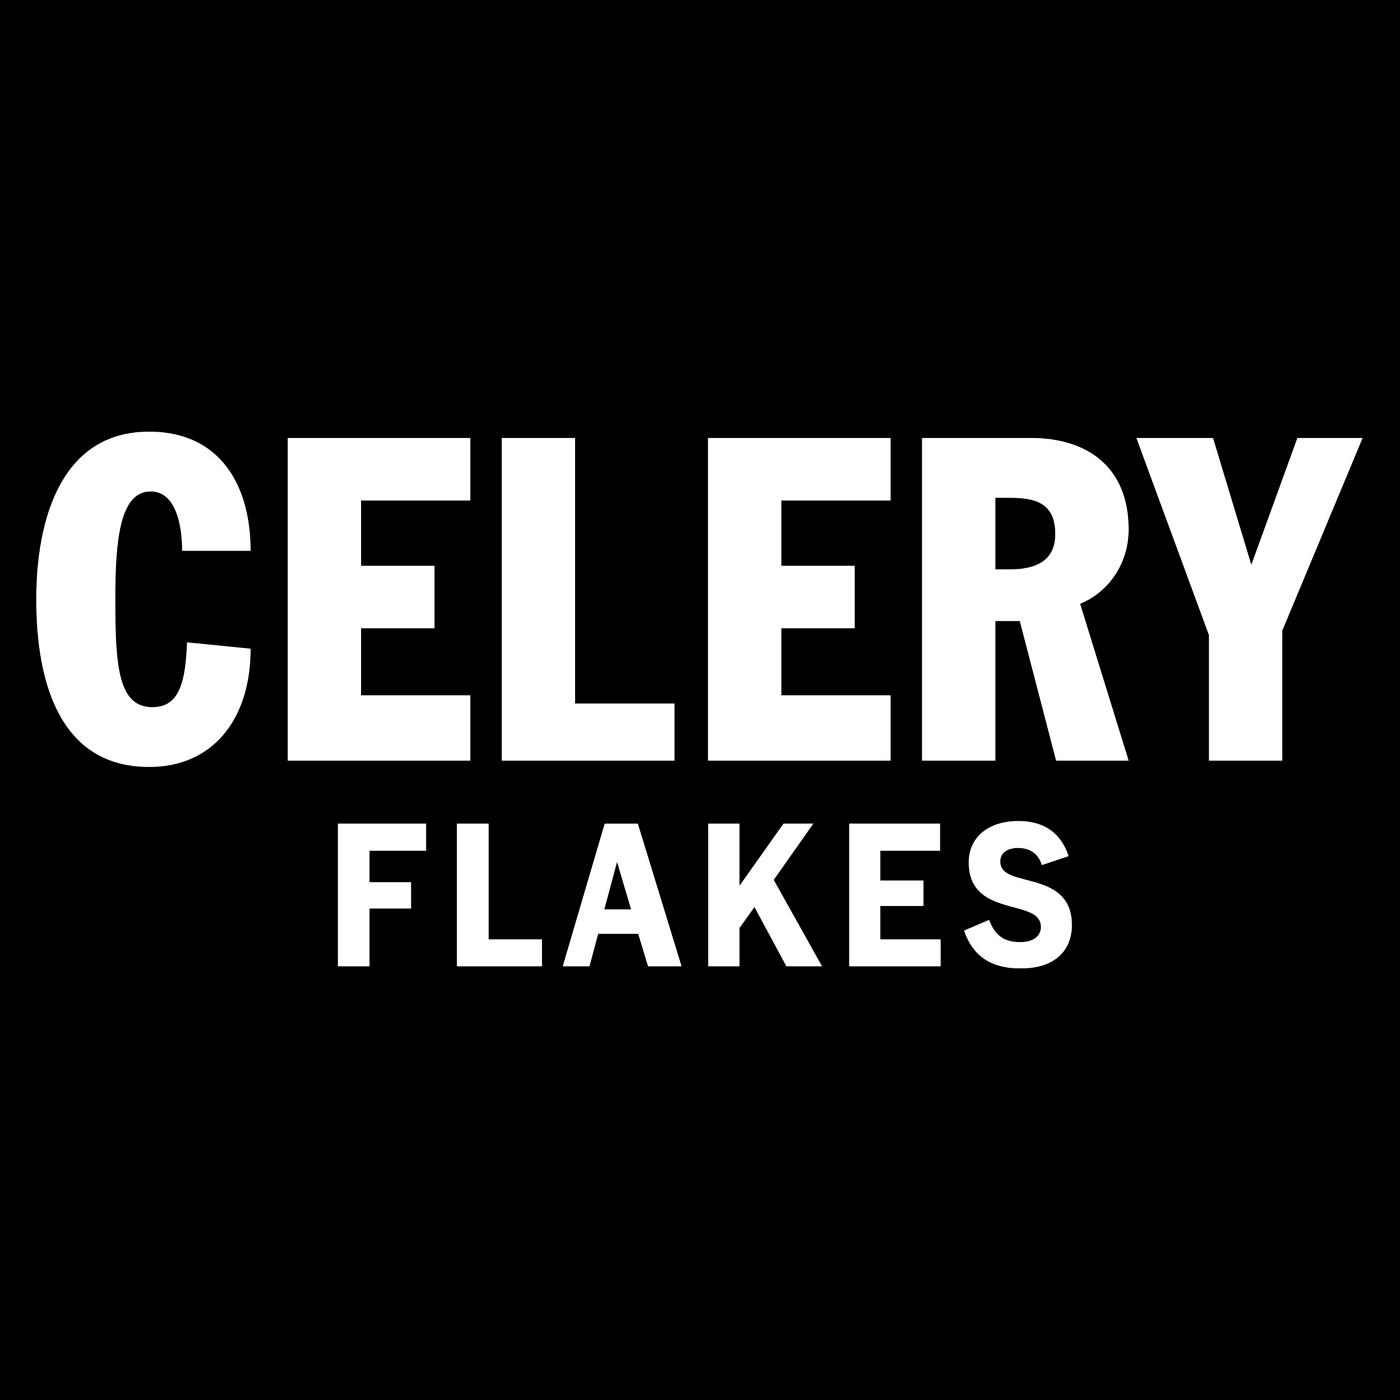 McCormick Celery Flakes; image 7 of 7